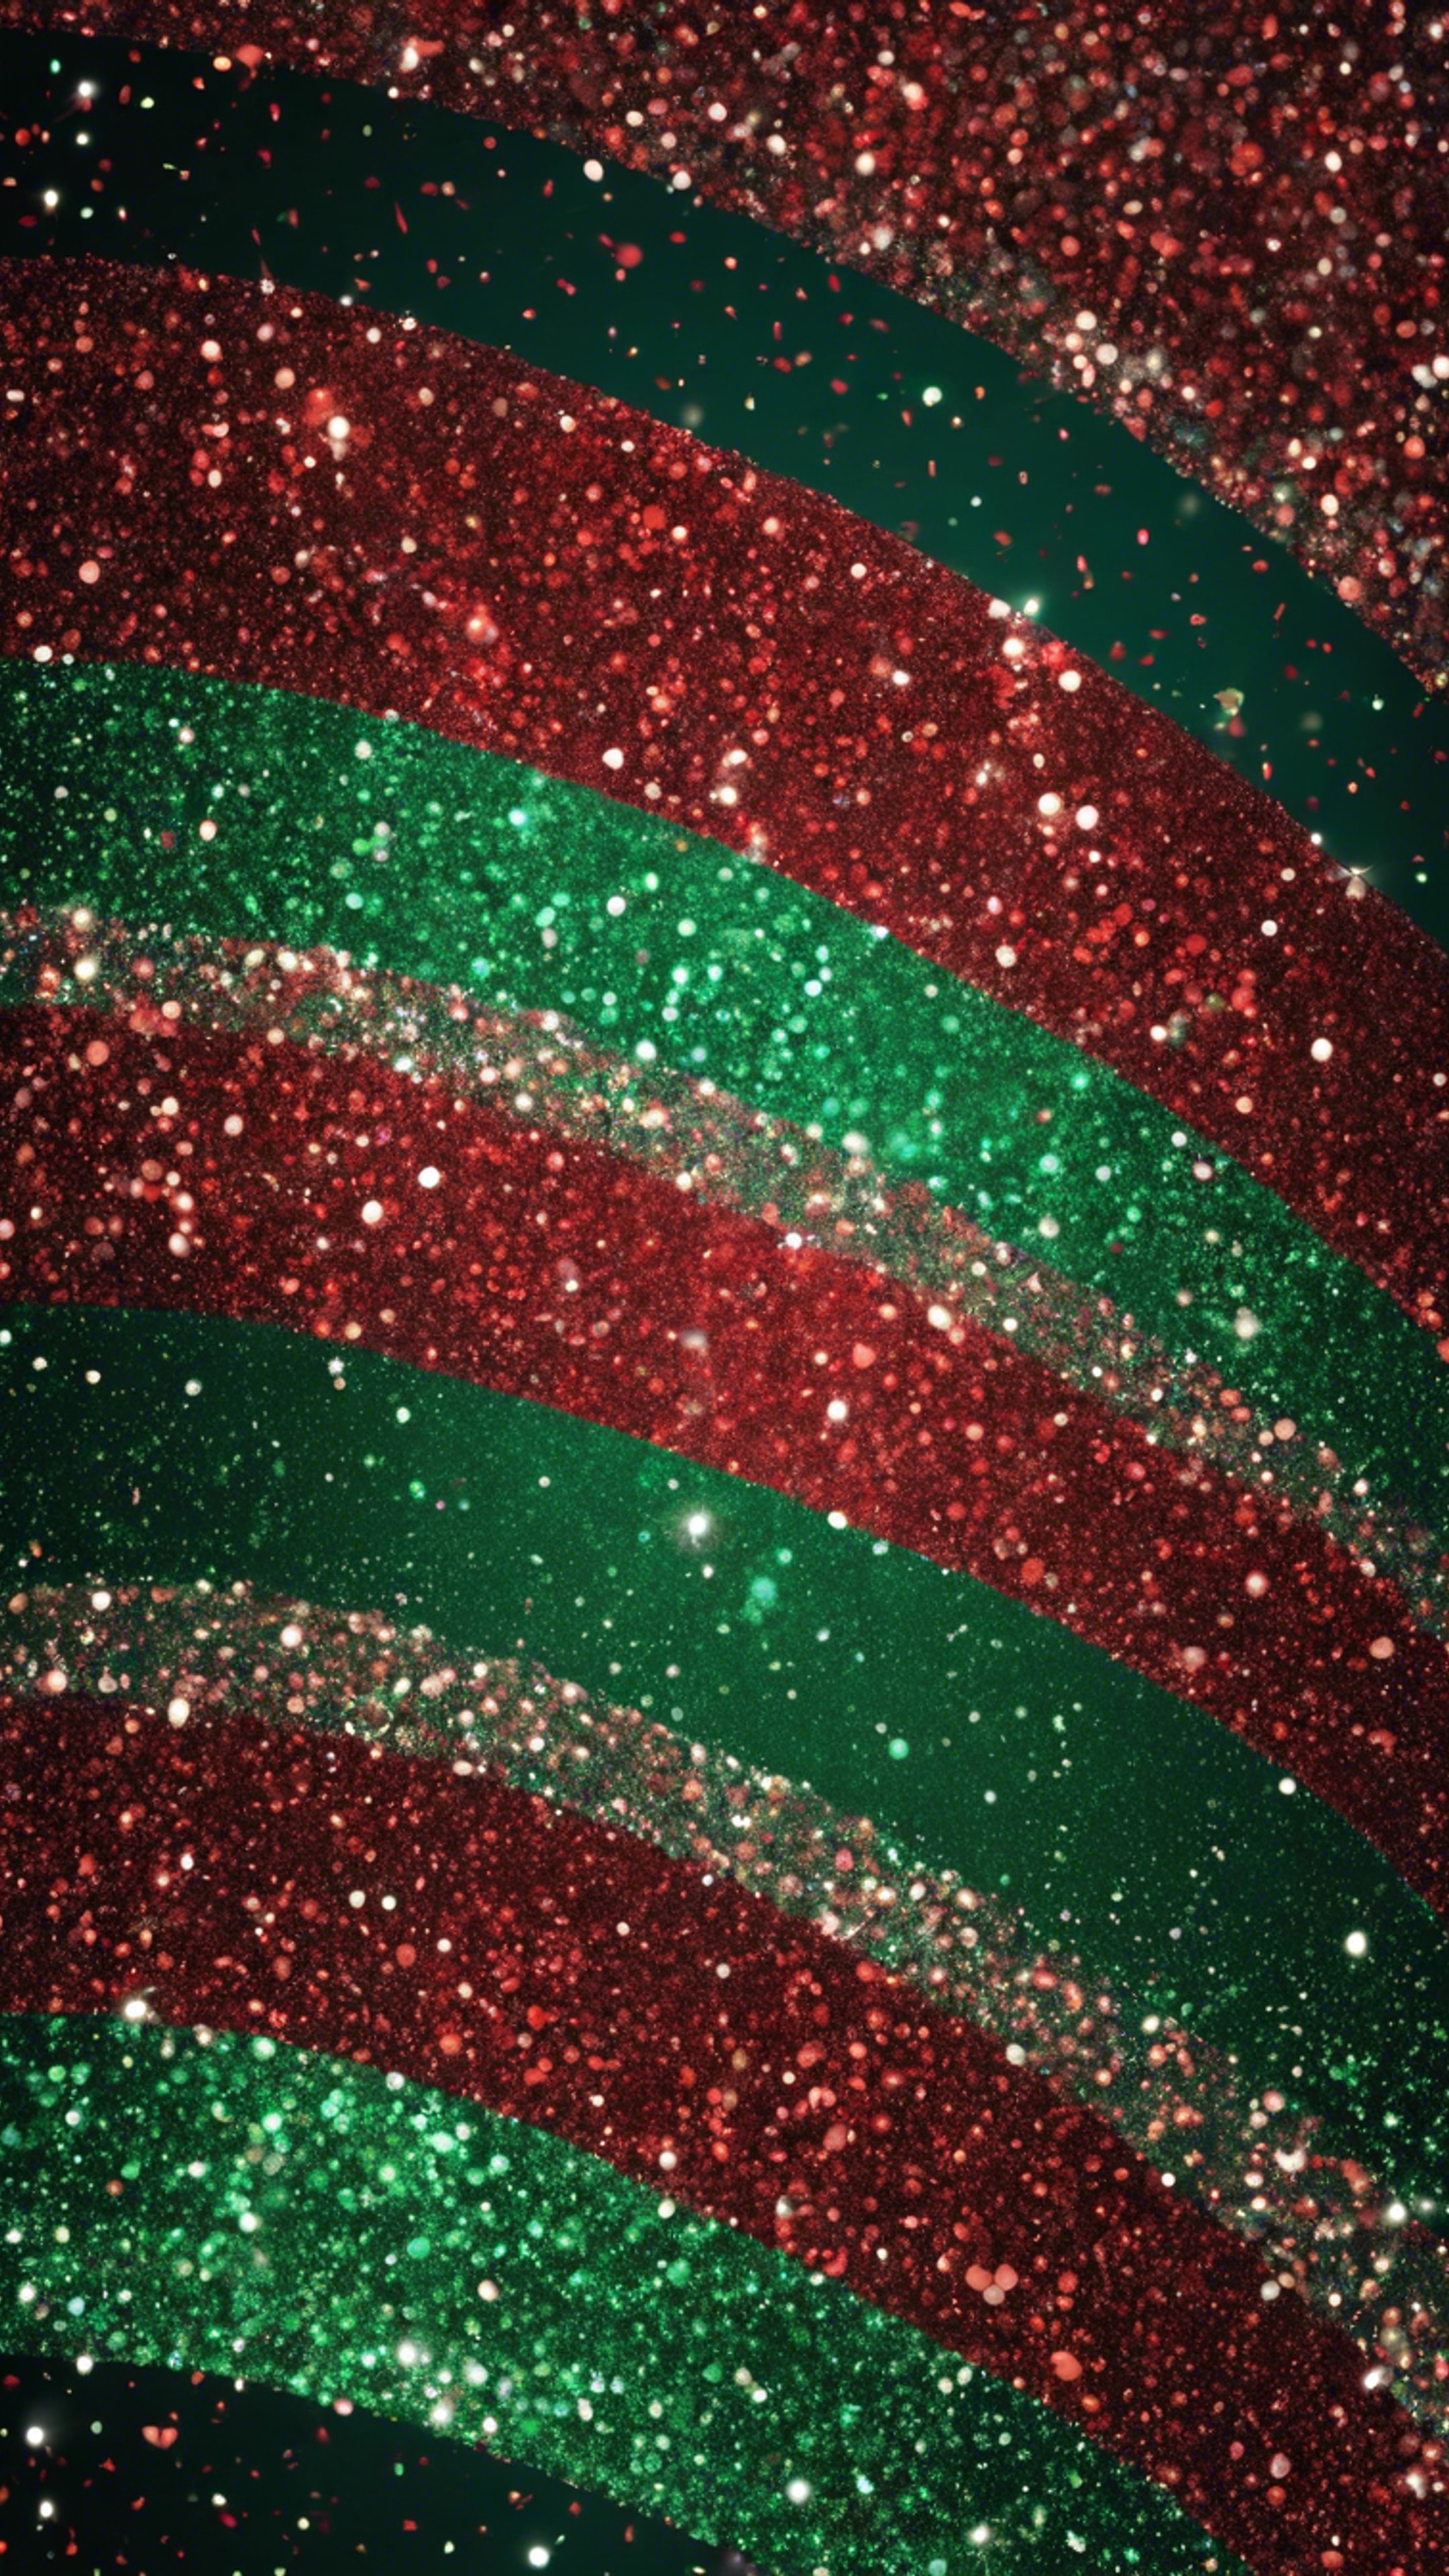 A diagonal stripes pattern made up of red and green glitters Валлпапер[e53958bfb8c54001b83e]